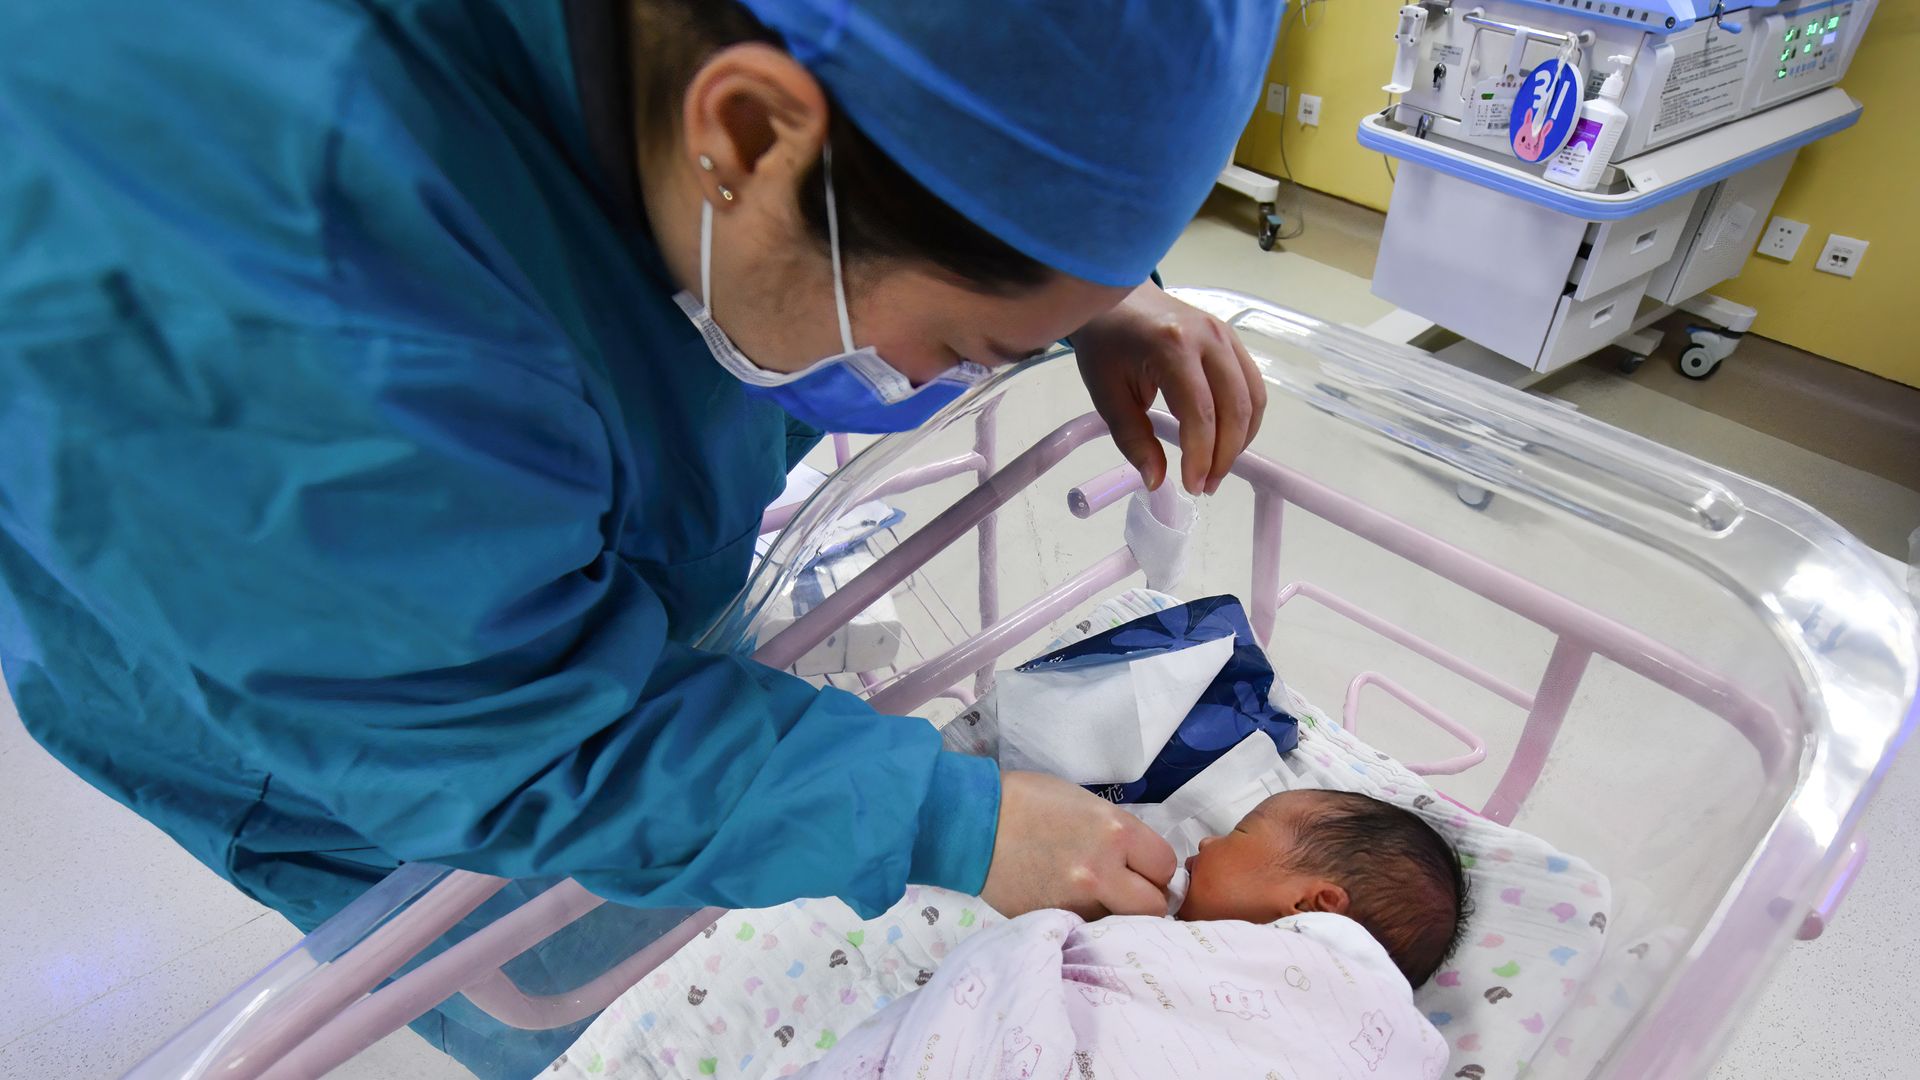 A newborn baby is seen being cared for in the ward of the hospital neonatal care center in Fuyang, Anhui, China, on April 25.